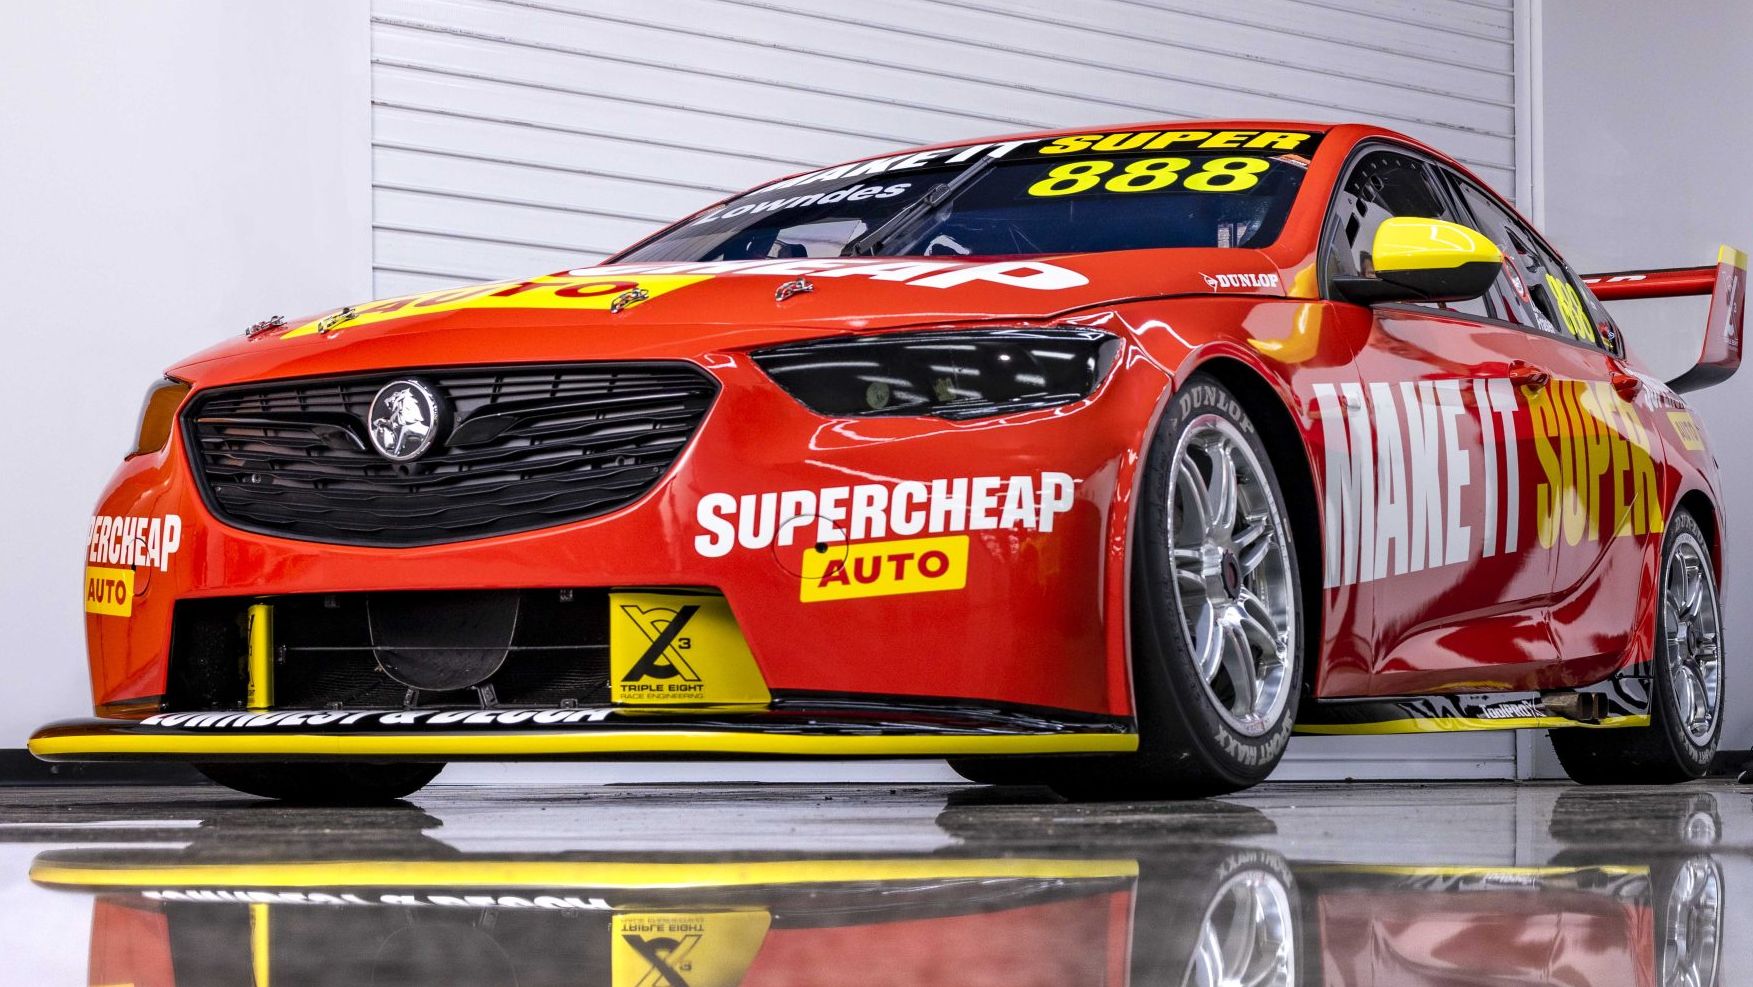 Craig Lowndes and Declan Fraser will team up in a Supercheap Auto-backed Triple Eight Commodore wildcard in the Bathurst 1000.